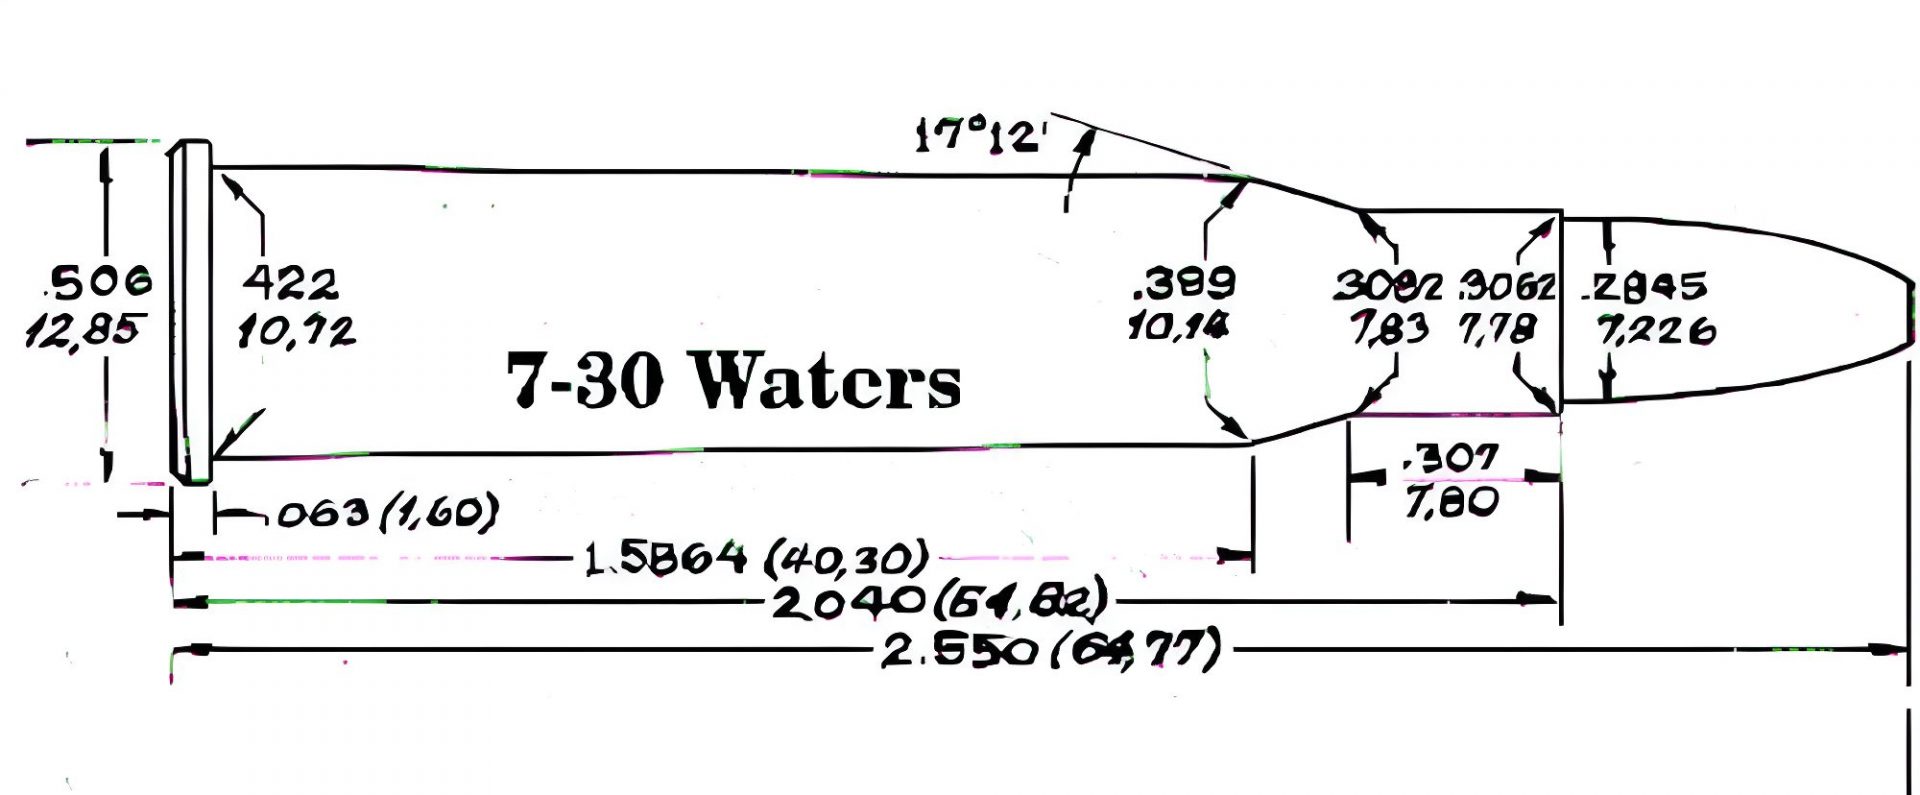 7-30 Waters Ammo